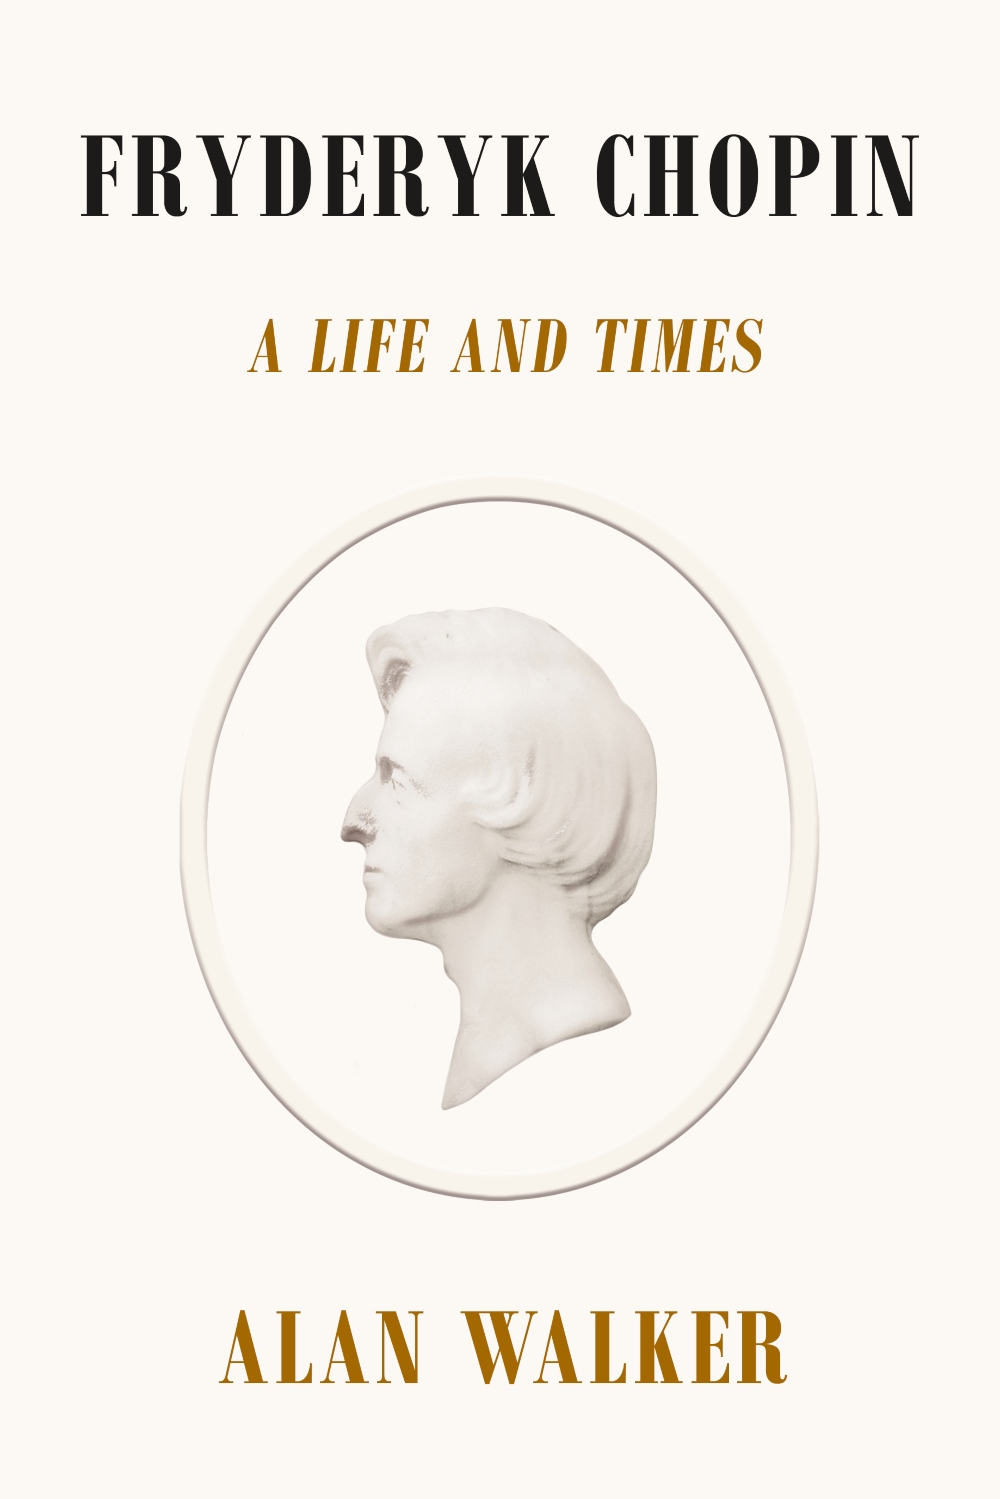 Book jacket for Fryderyk Chopin: A Life and Times.